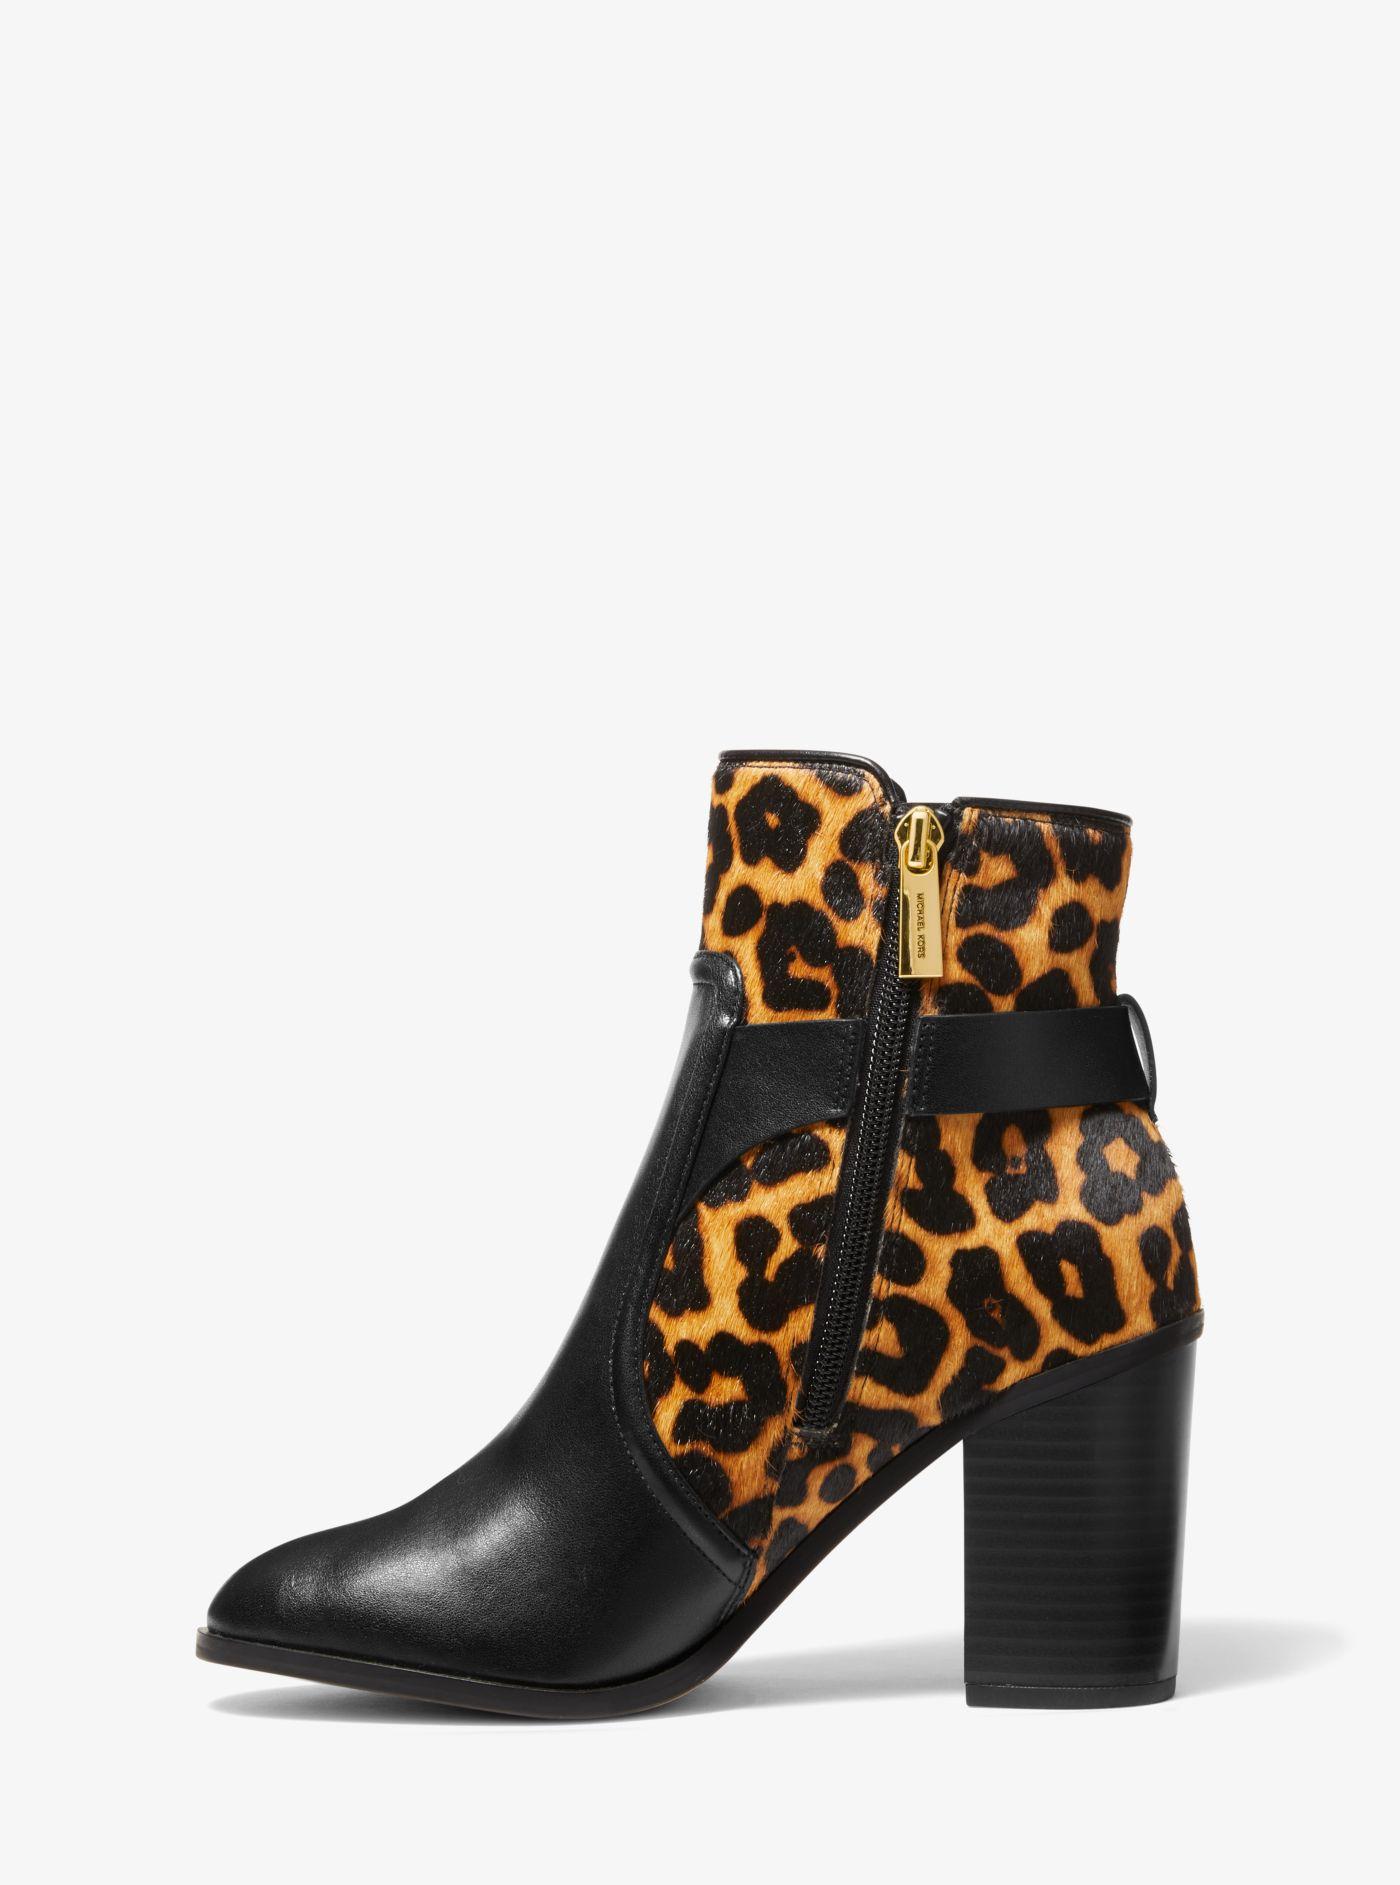 Michael Kors Carmen Leopard Print Calf Hair And Leather Ankle Boot in Black  | Lyst